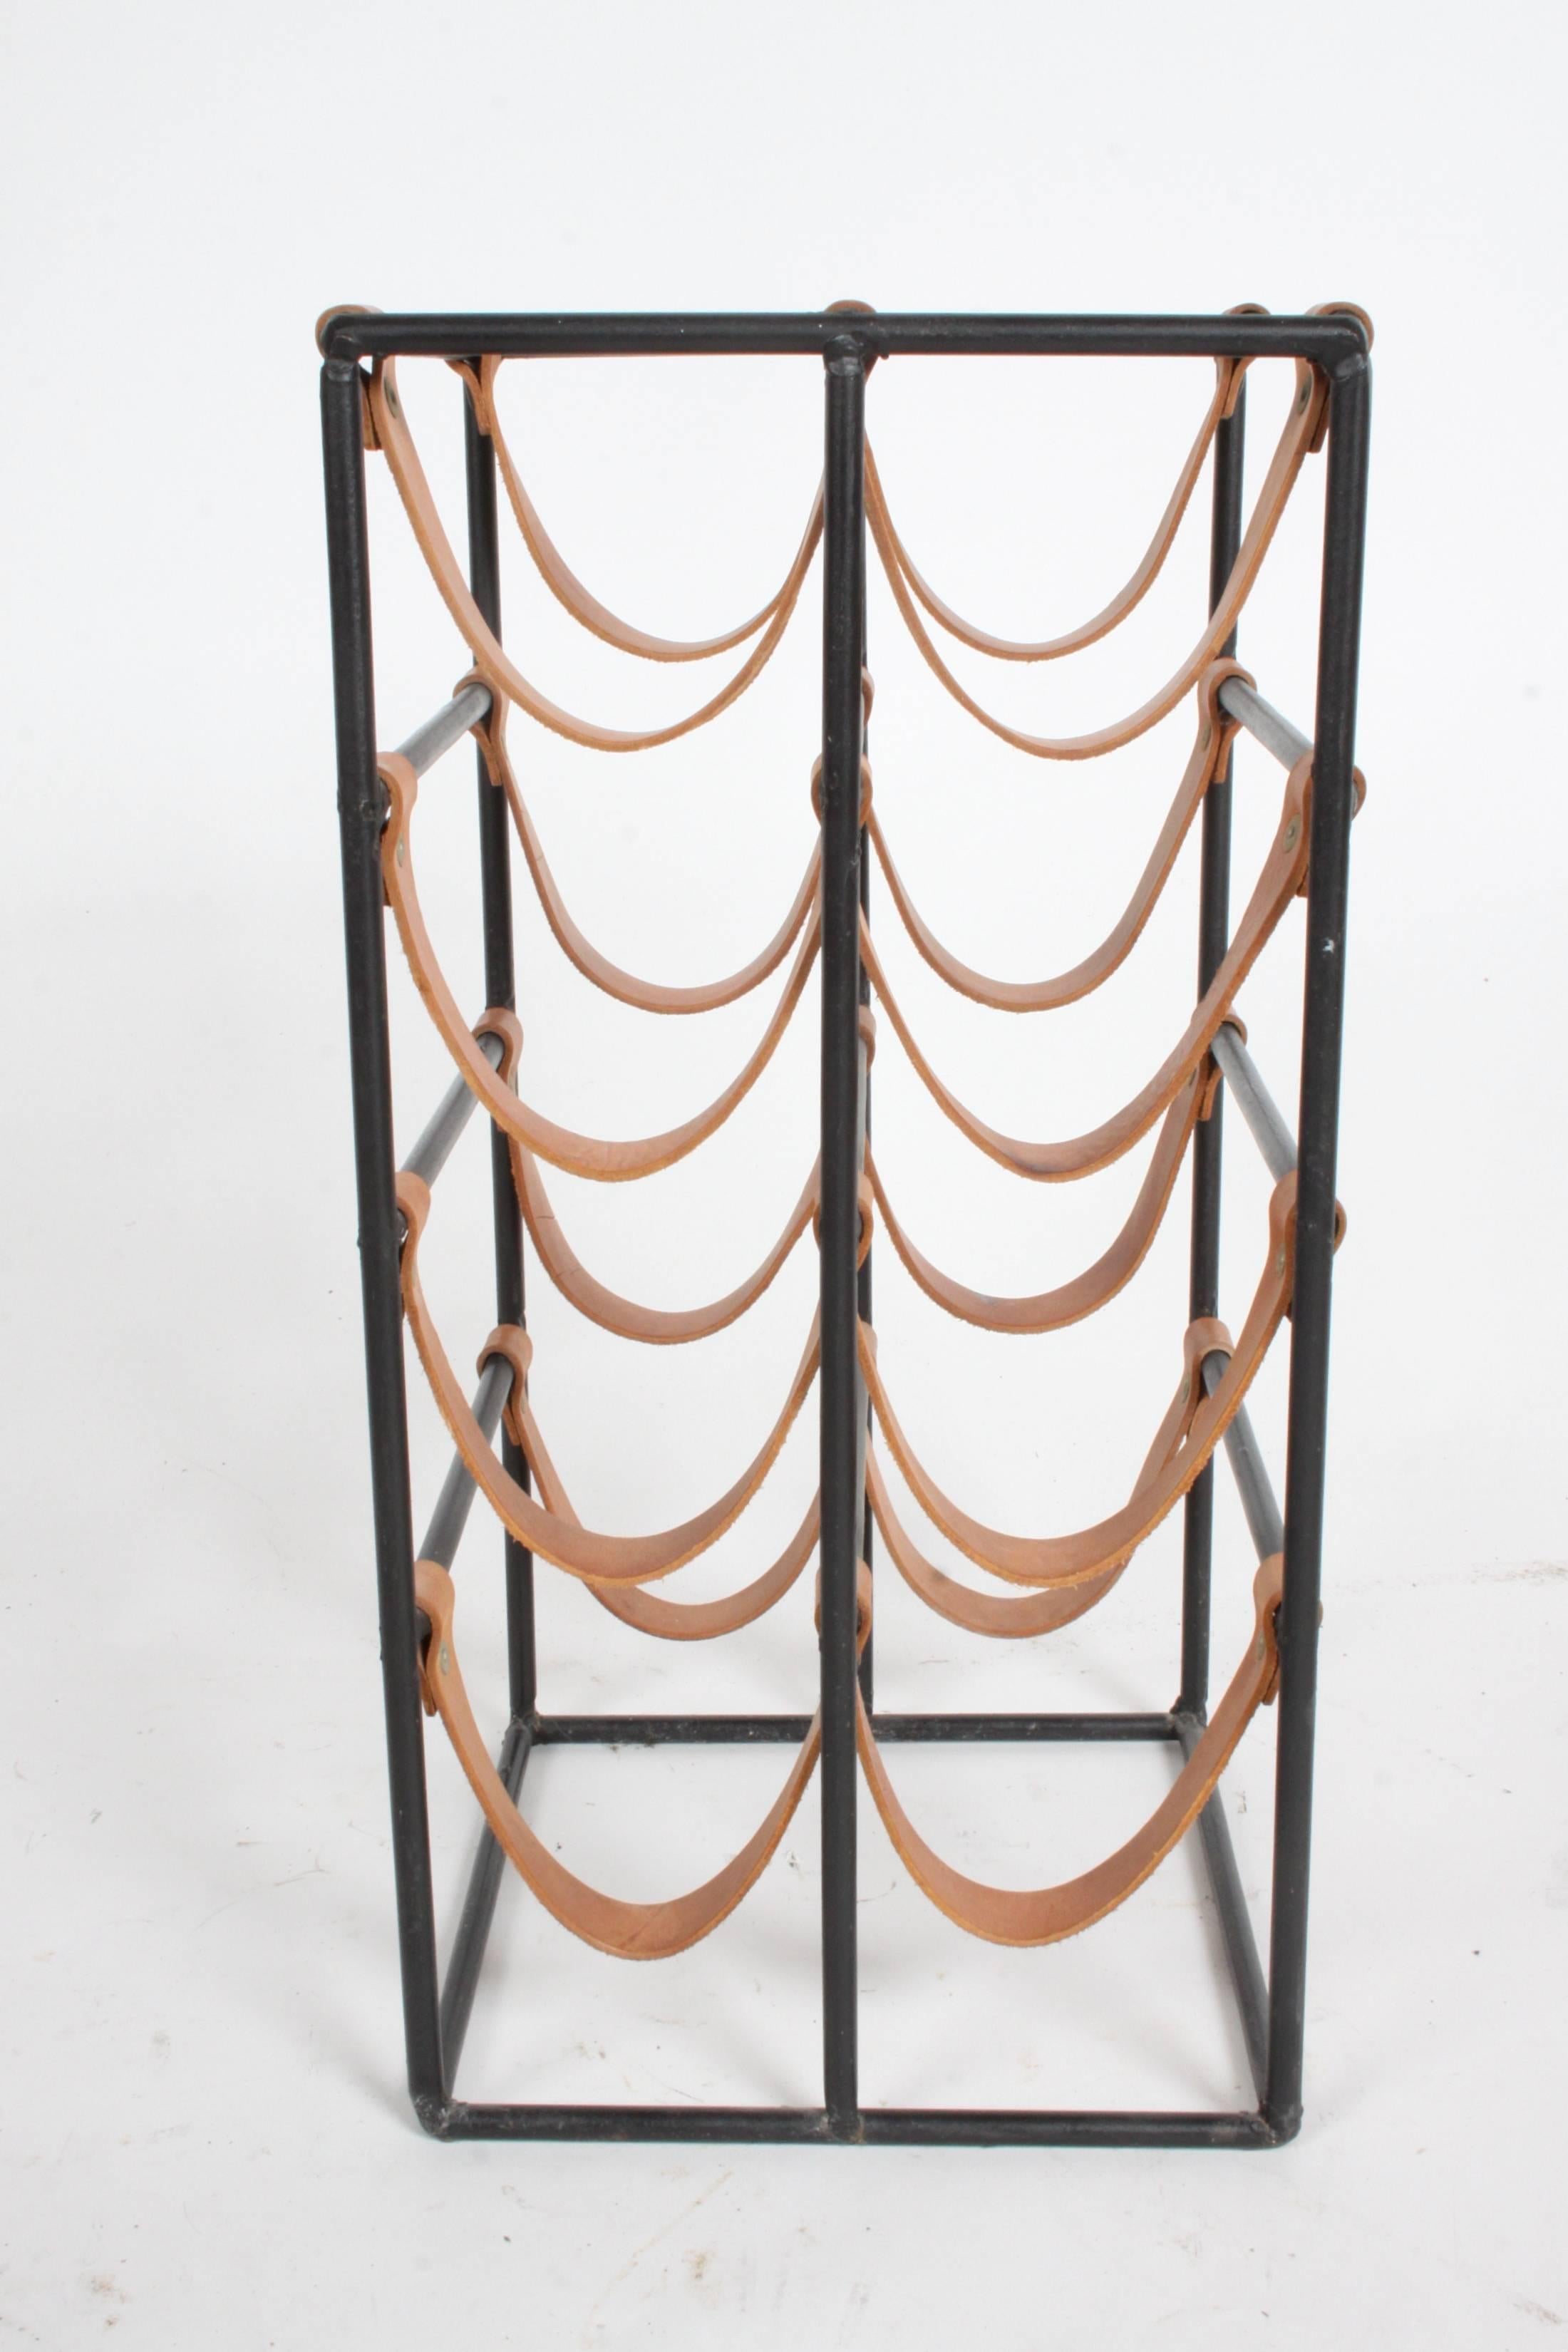 American Arthur Umanoff 1950s Iron and Leather Wine Rack For Sale